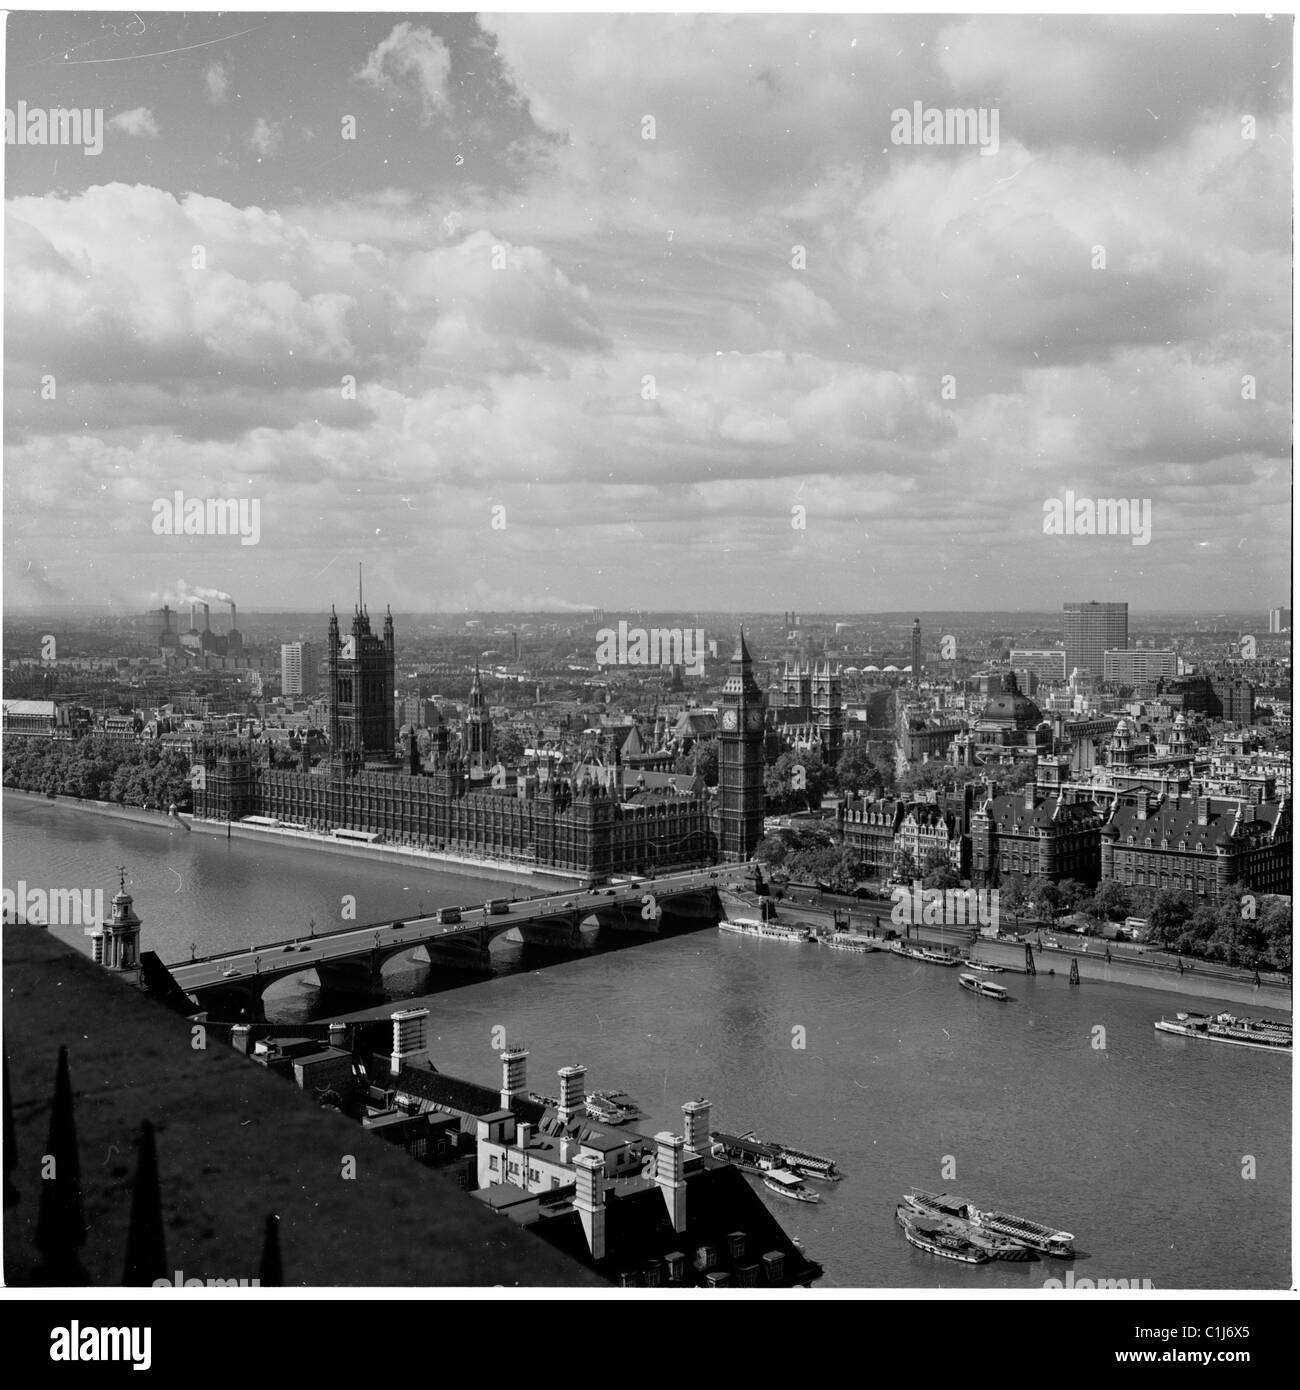 1960s, aerial view of the River Thames, London and surrounding landscape showing Westminster Bridge & the Victoria Tower at the Palace of Westminster. Stock Photo